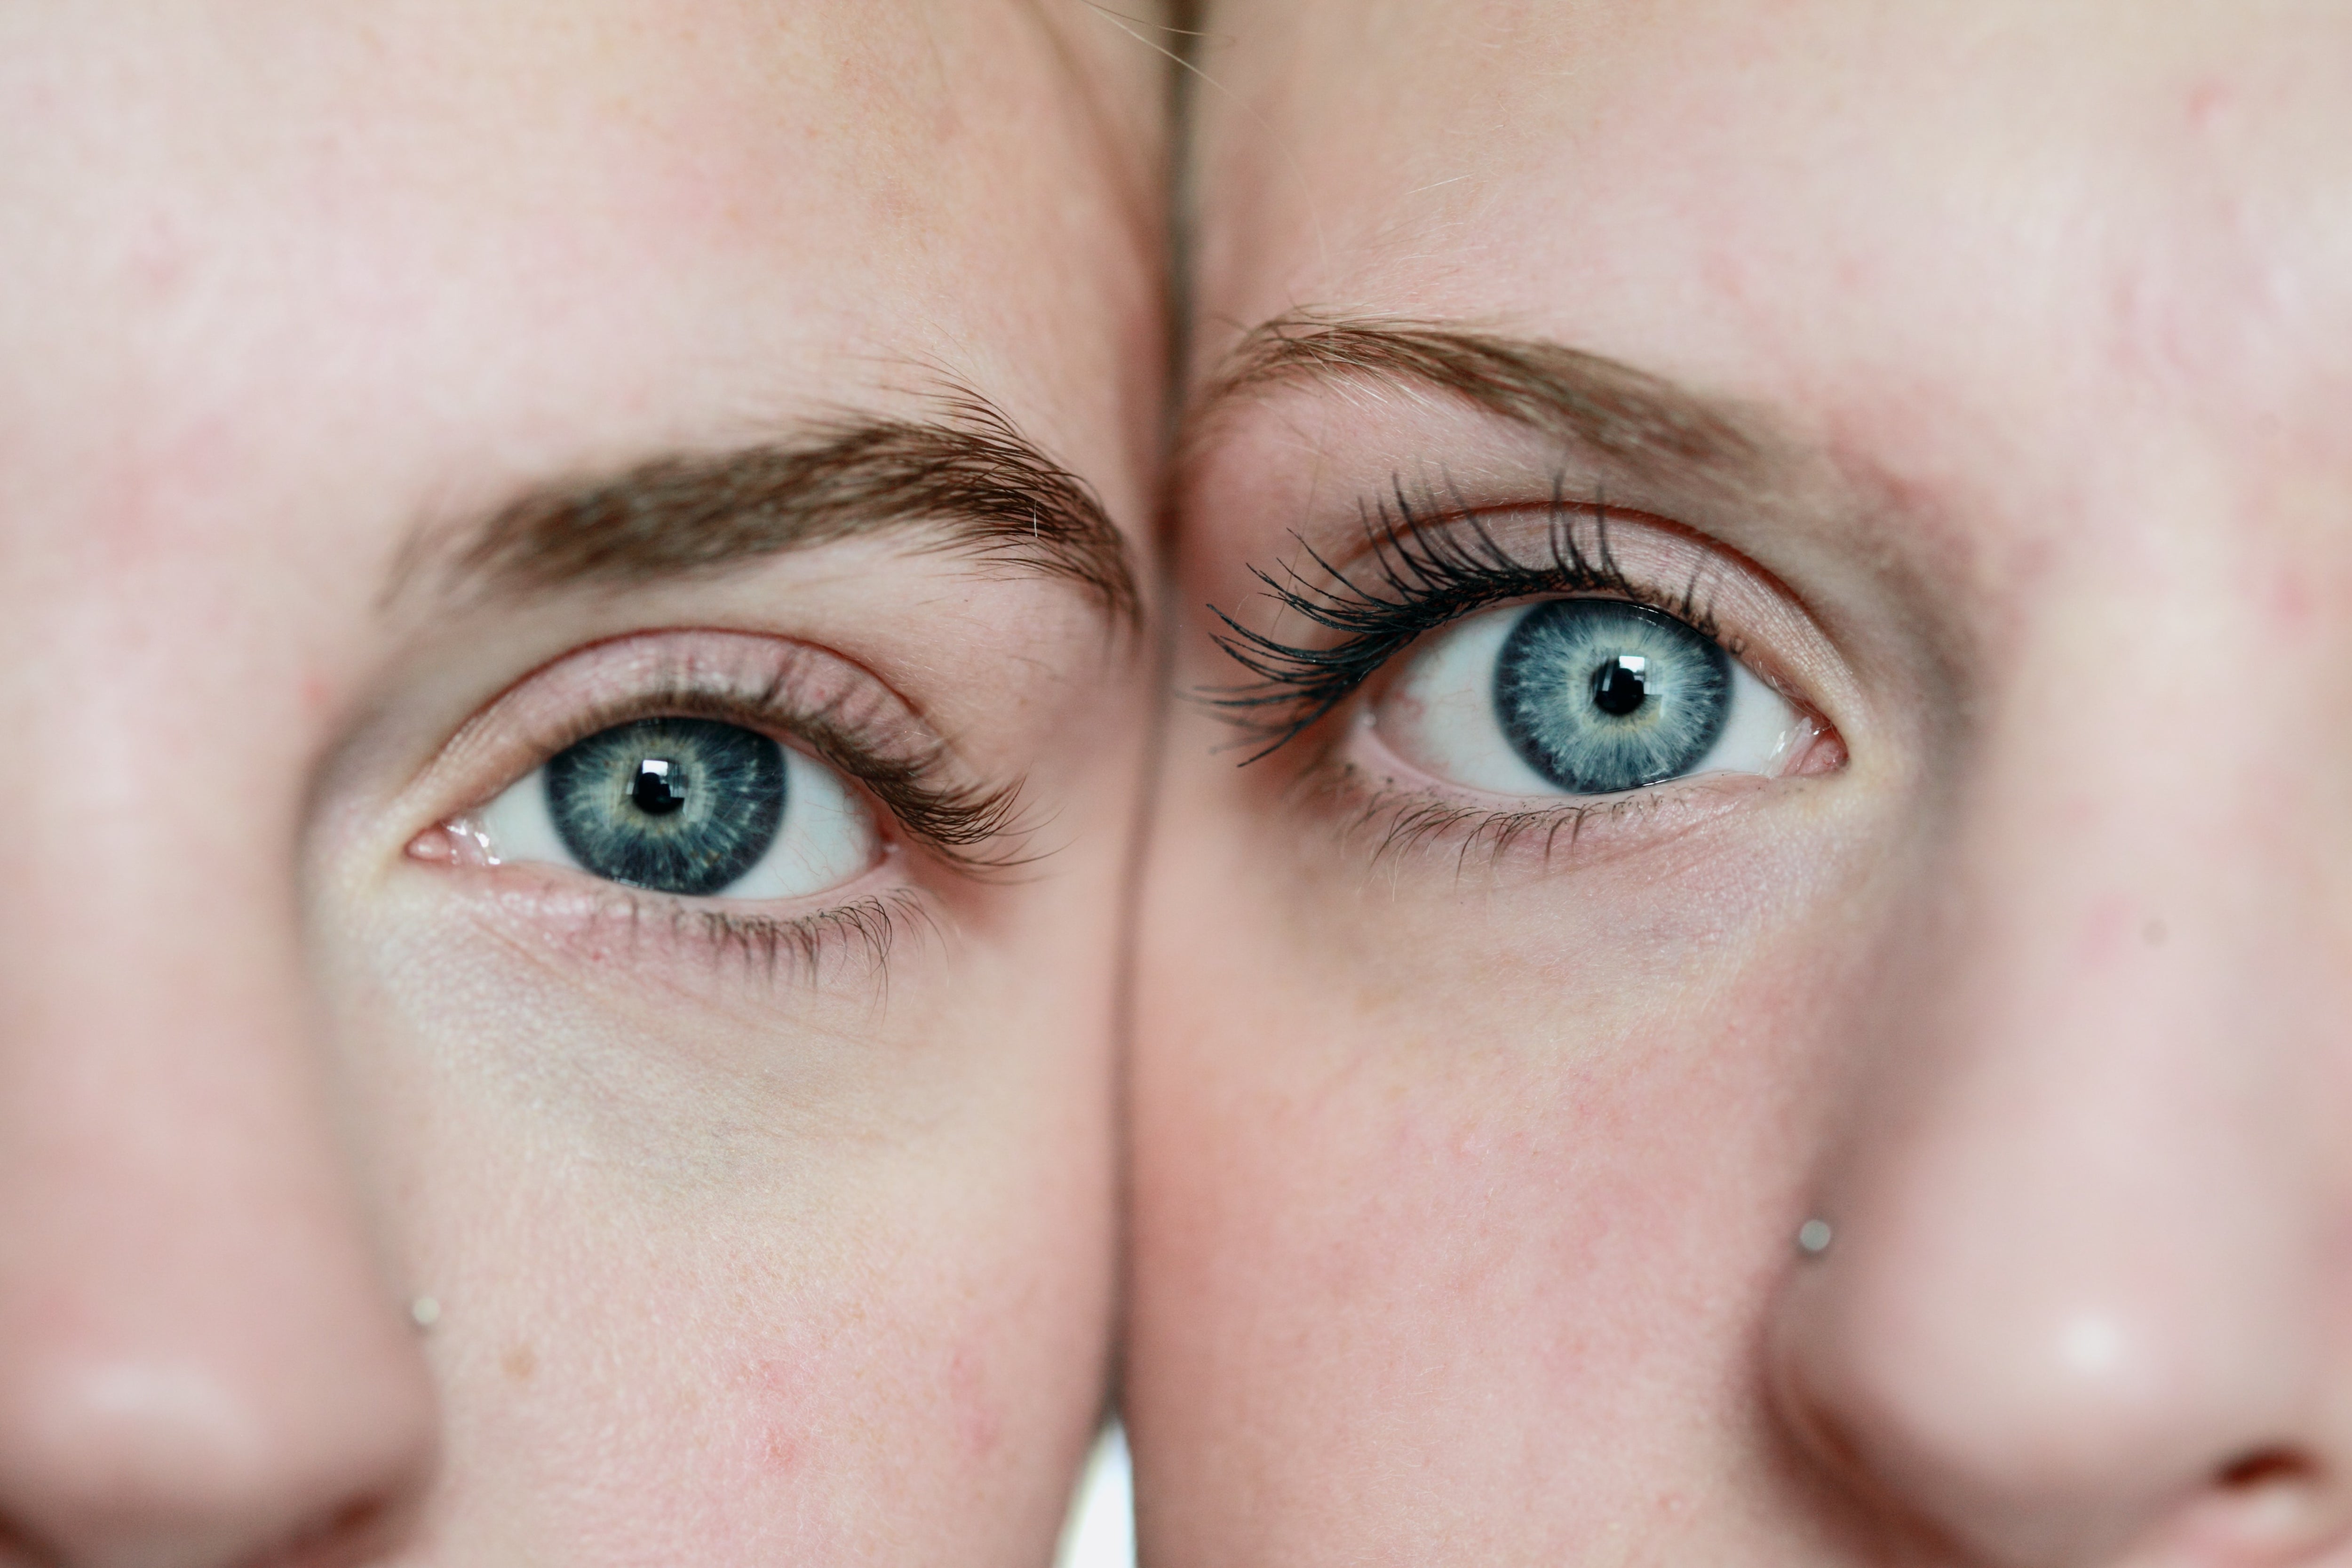 Close-Up of Two Siblings Faces With The Focus on Their Eyes